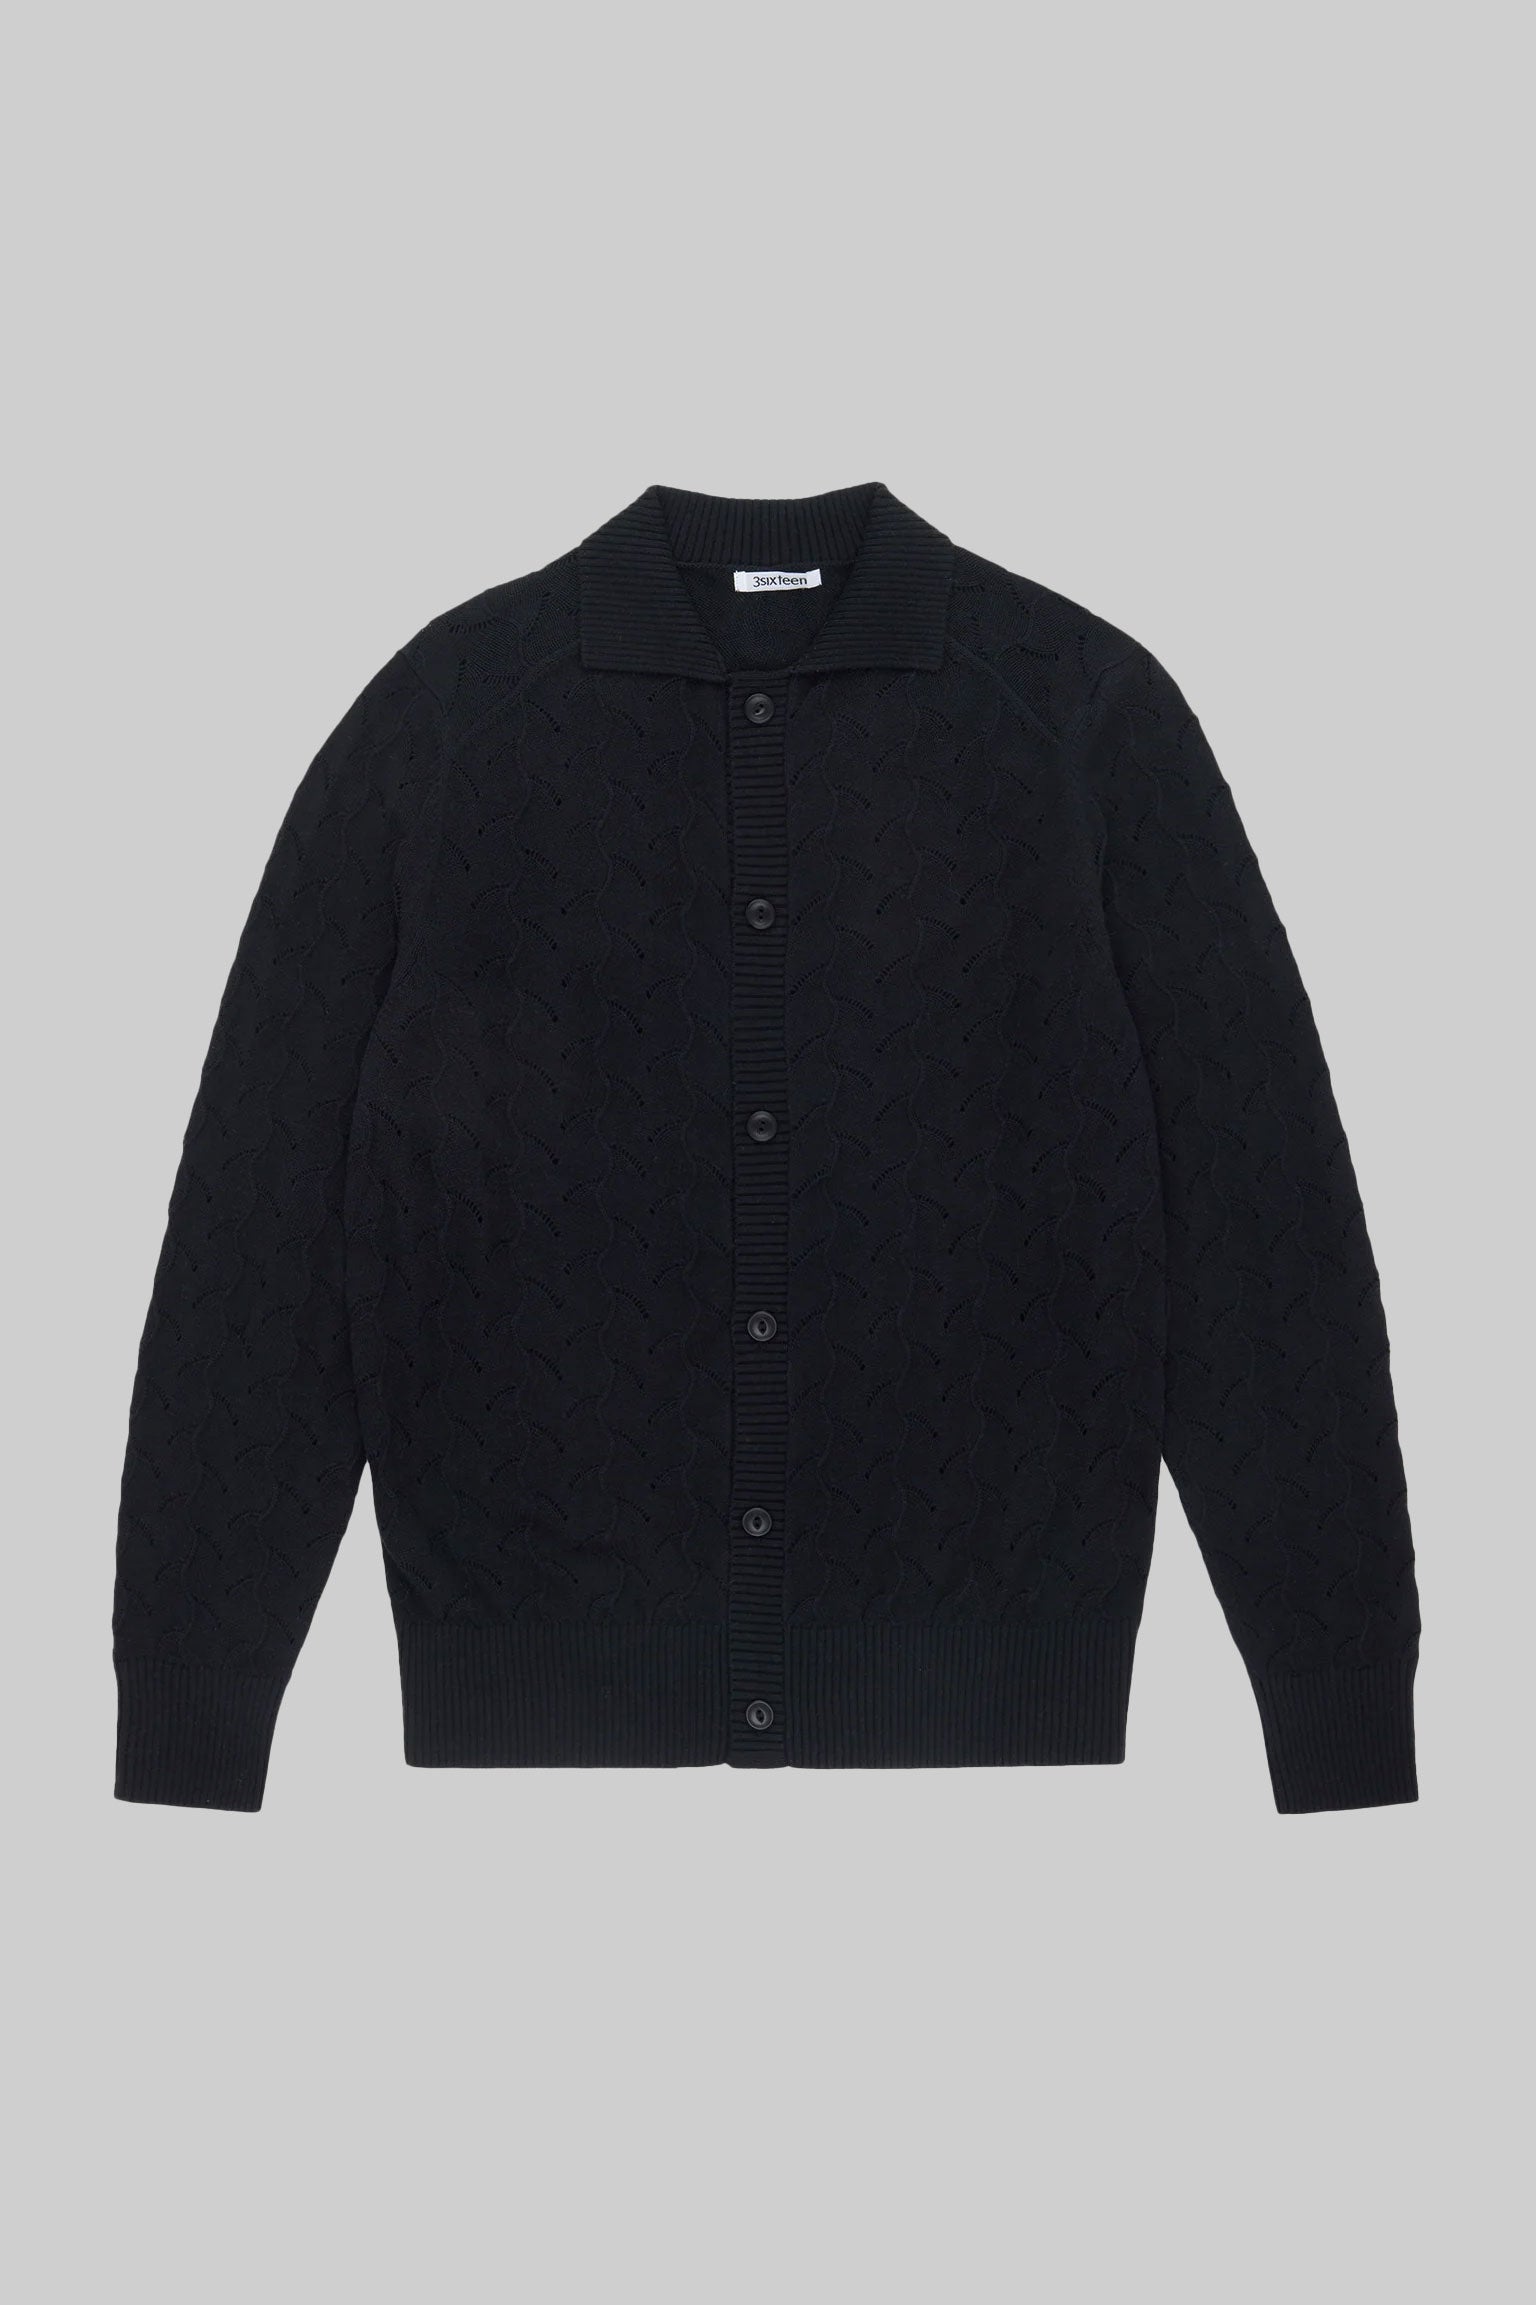 3Sixteen Collared Cardigan (Black Lace Knit)